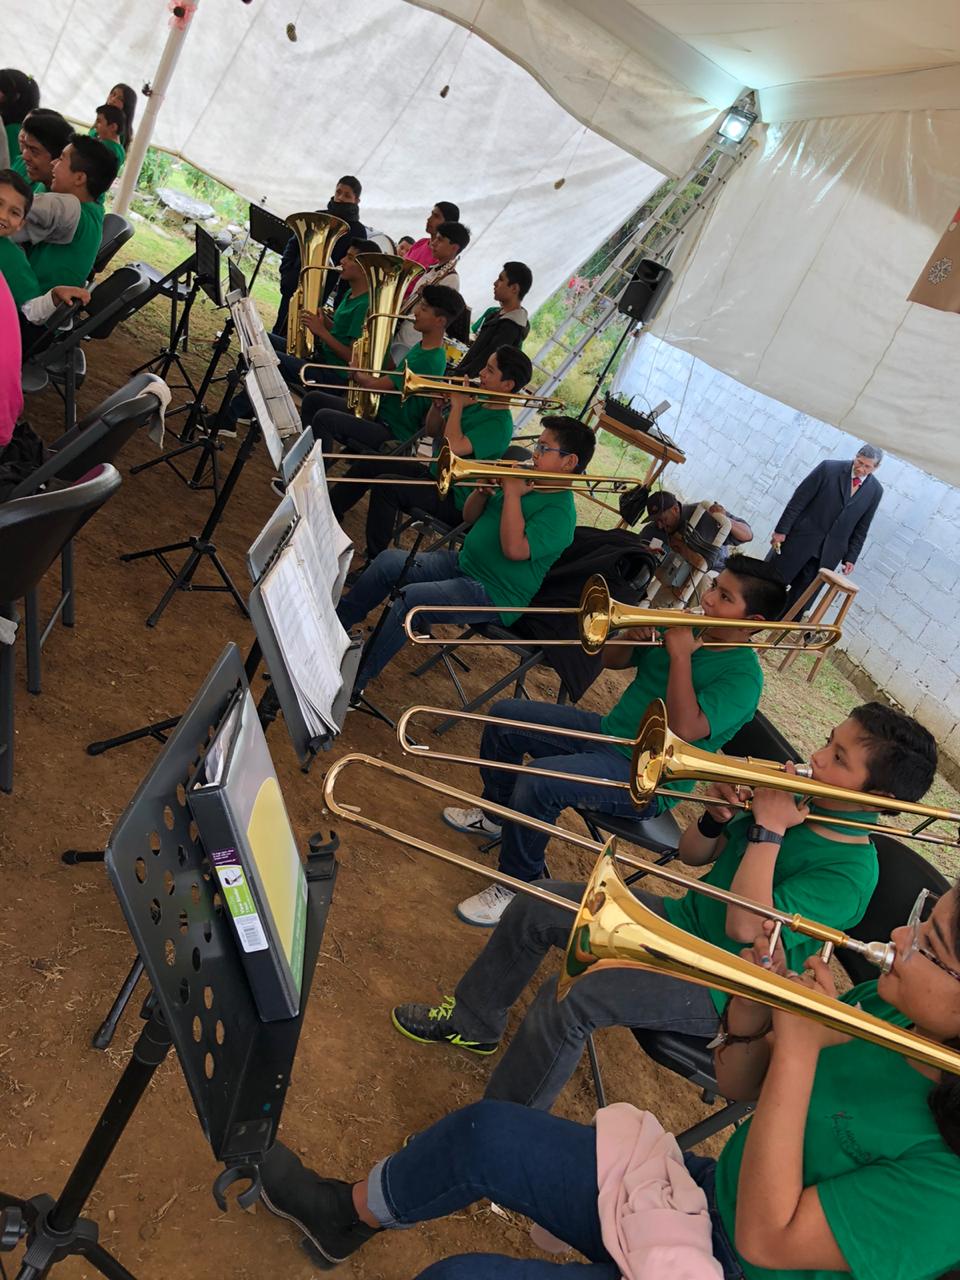 The children from Amanalco playing the trombones.